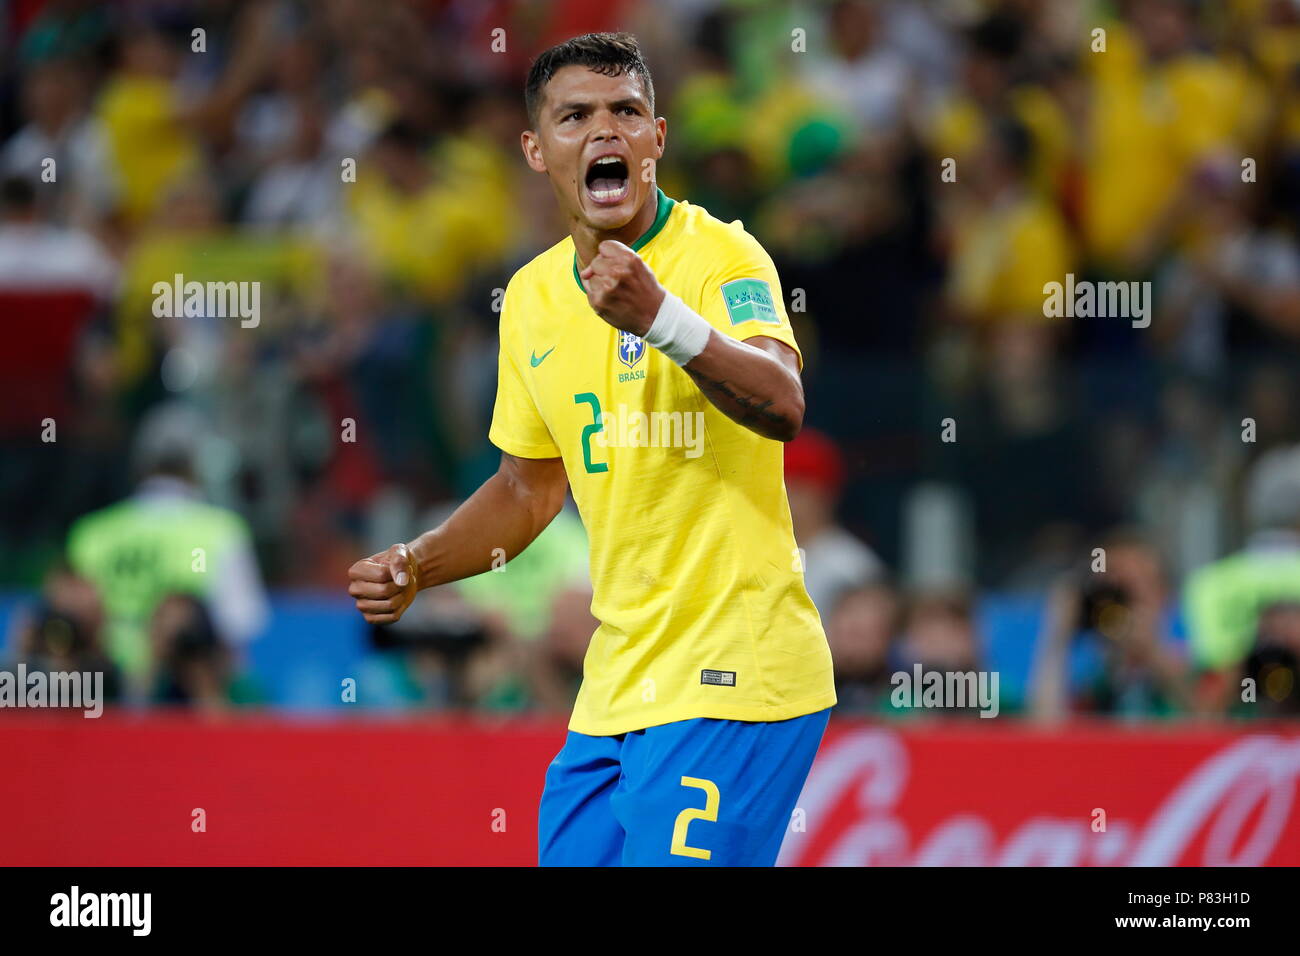 Moscow, Russia. 27th June, 2018. Thiago Silva (BRA) Football/Soccer : Silva celebrate after his goal on FIFA World Cup Russia 2018 match between Serbia 0-2 Brazil at the Spartak Stadium in Moscow, Russia . Credit: Mutsu KAWAMORI/AFLO/Alamy Live News Stock Photo